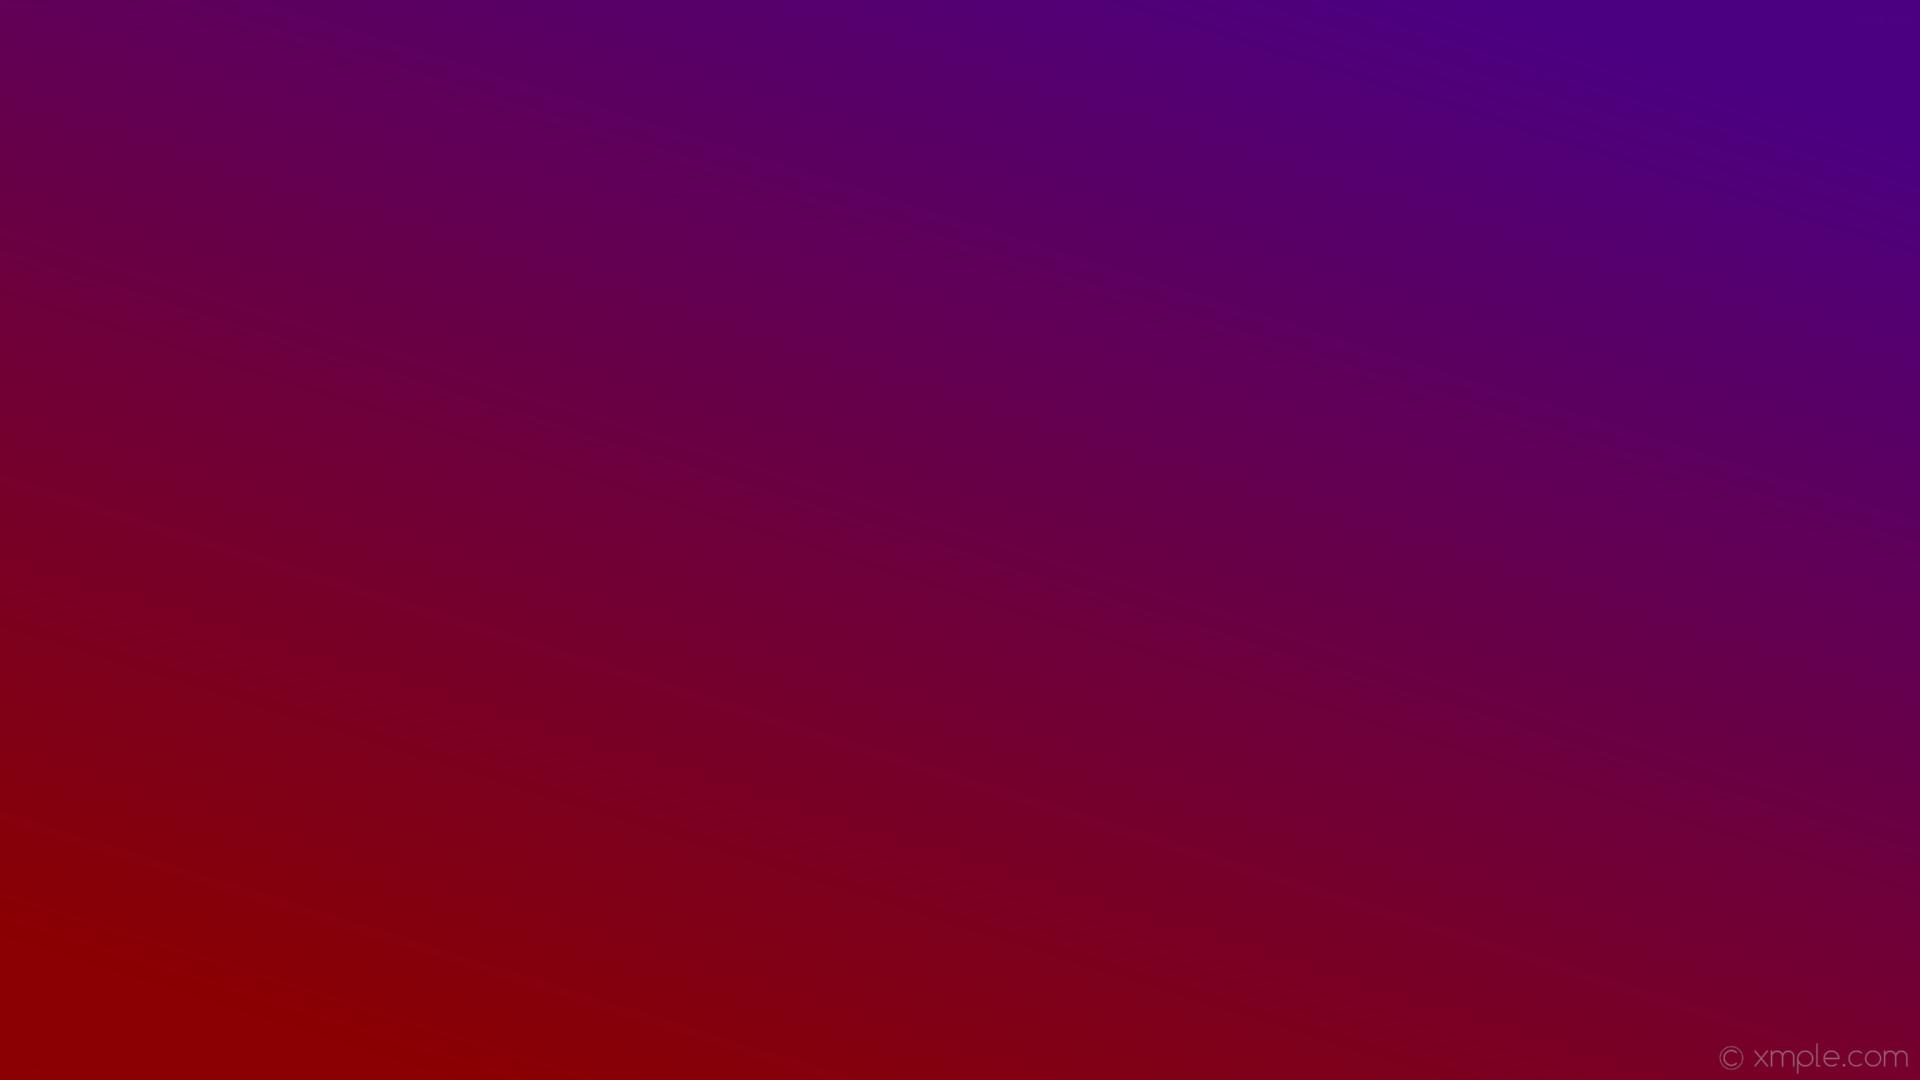 Purple and Red Wallpaper